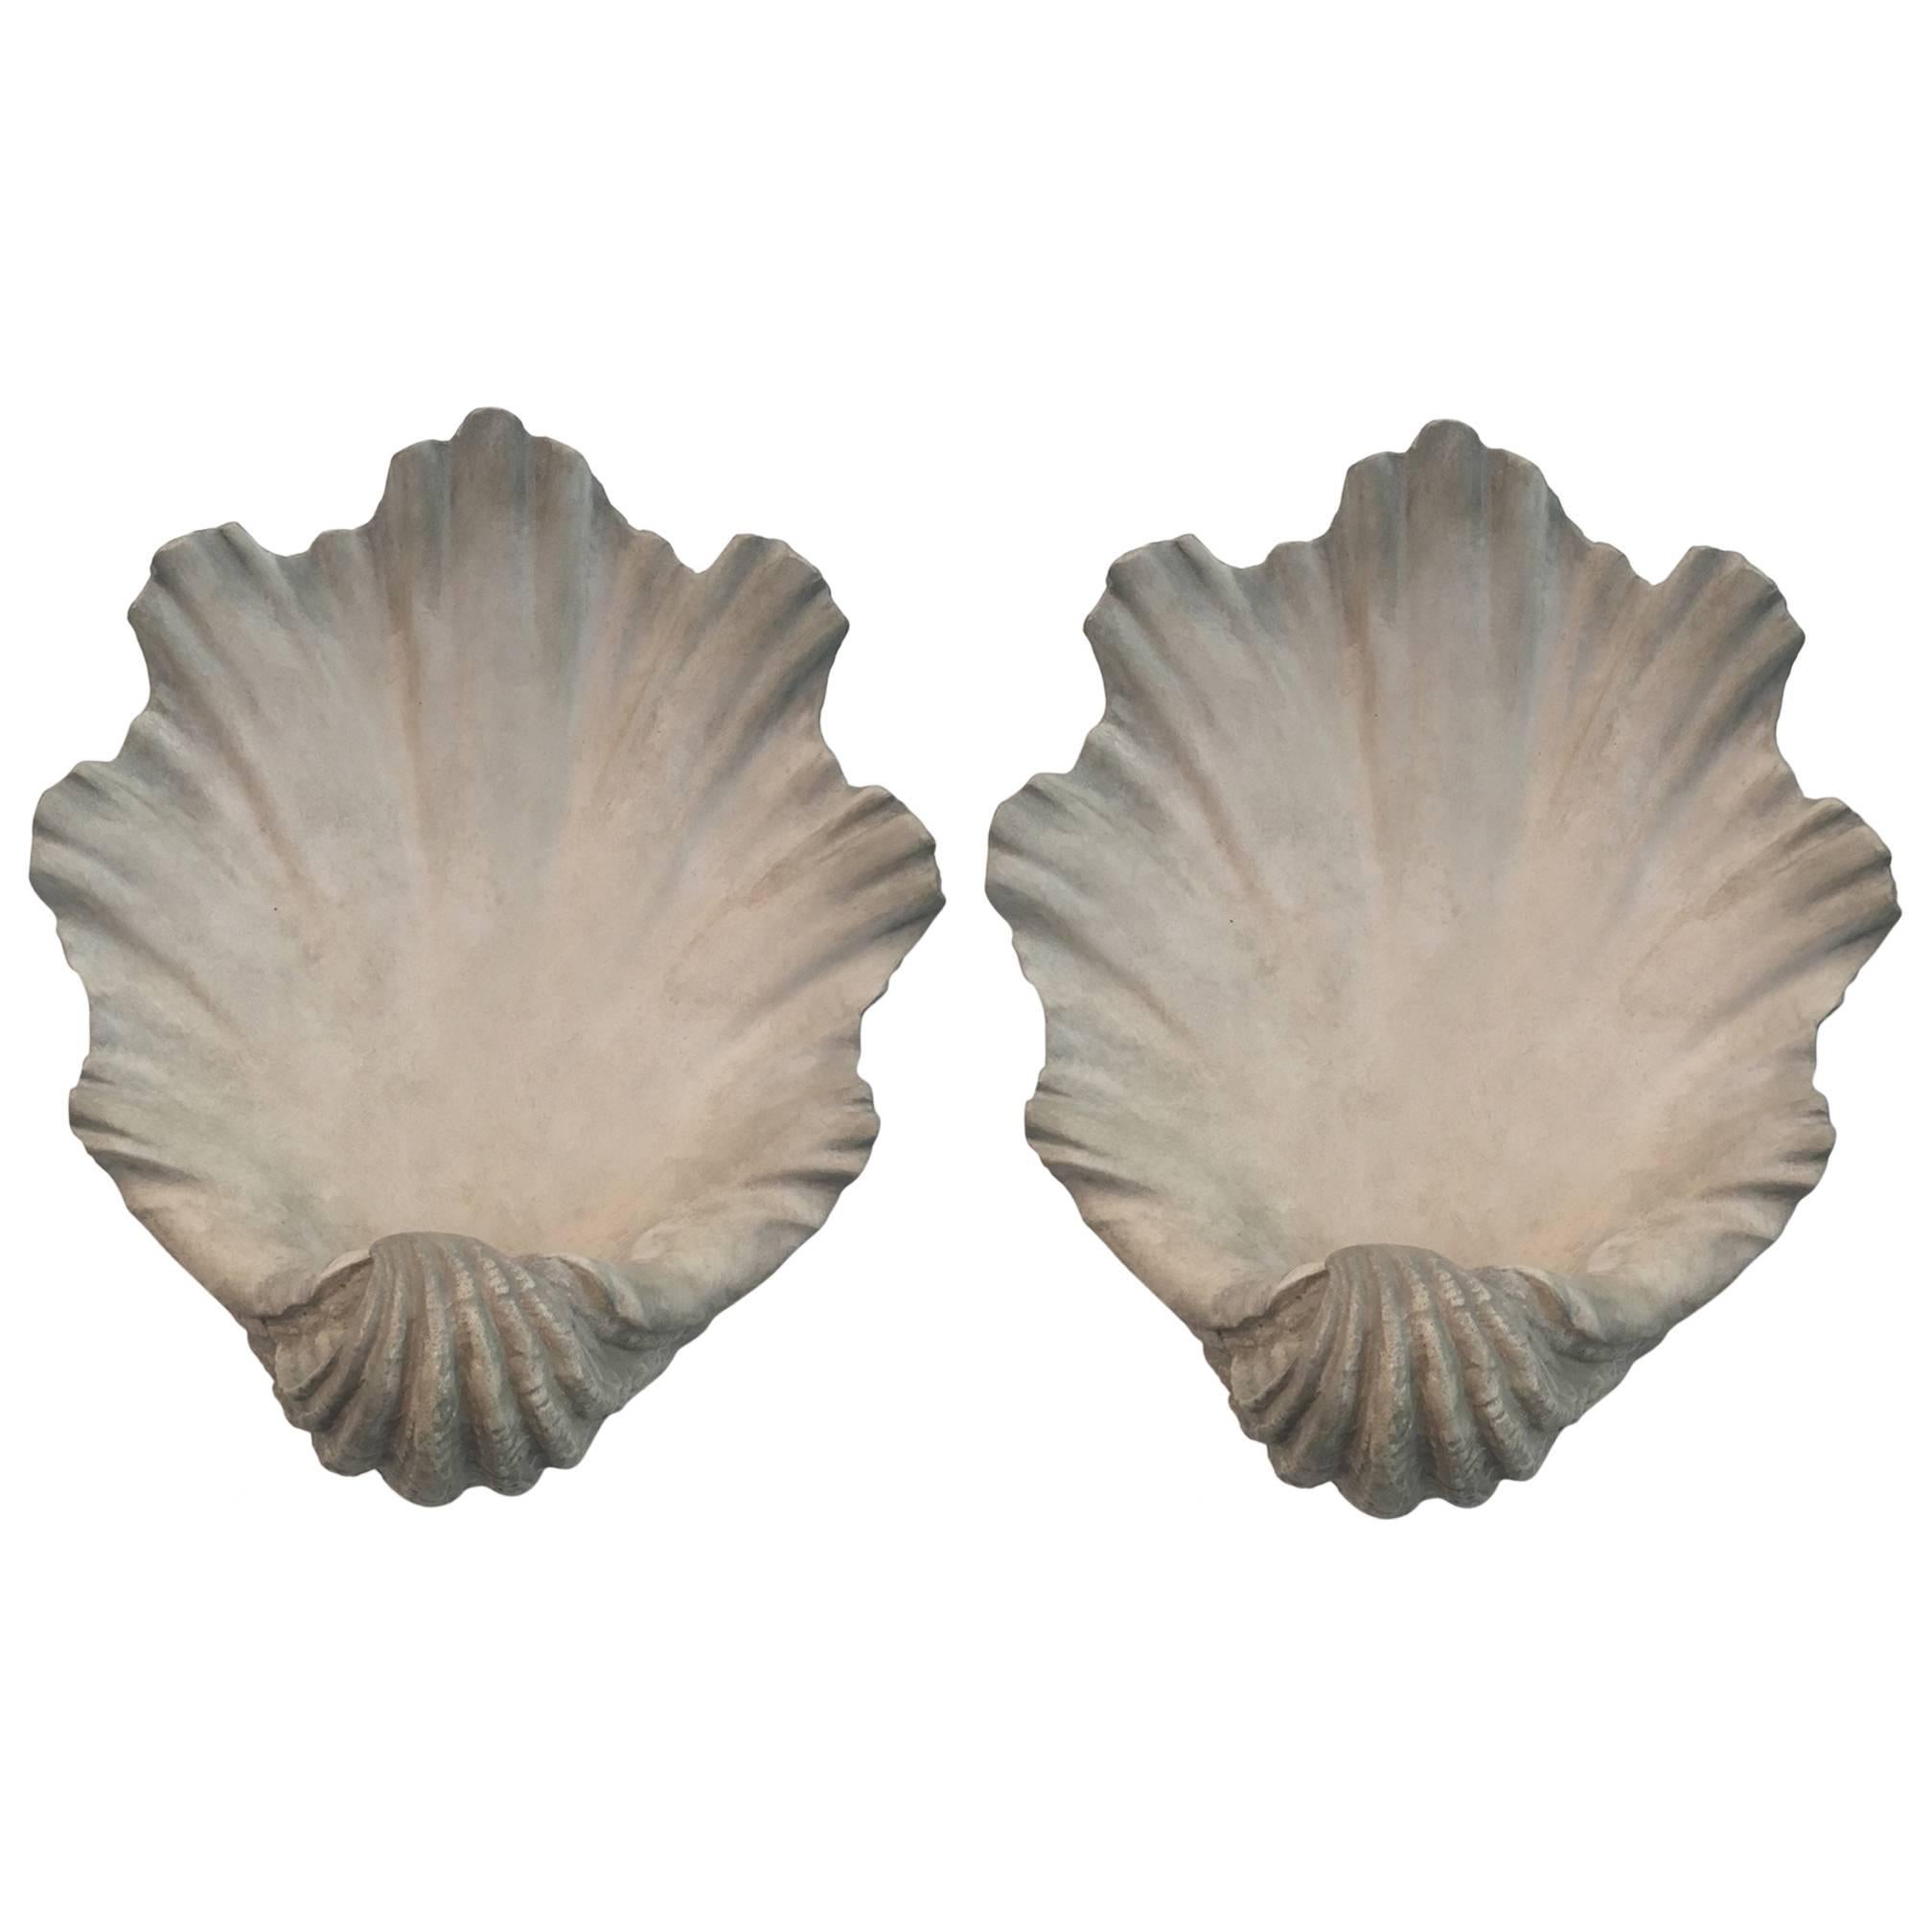 Pair of Modern Scallop Shell Wall Lights, Antiqued Plaster